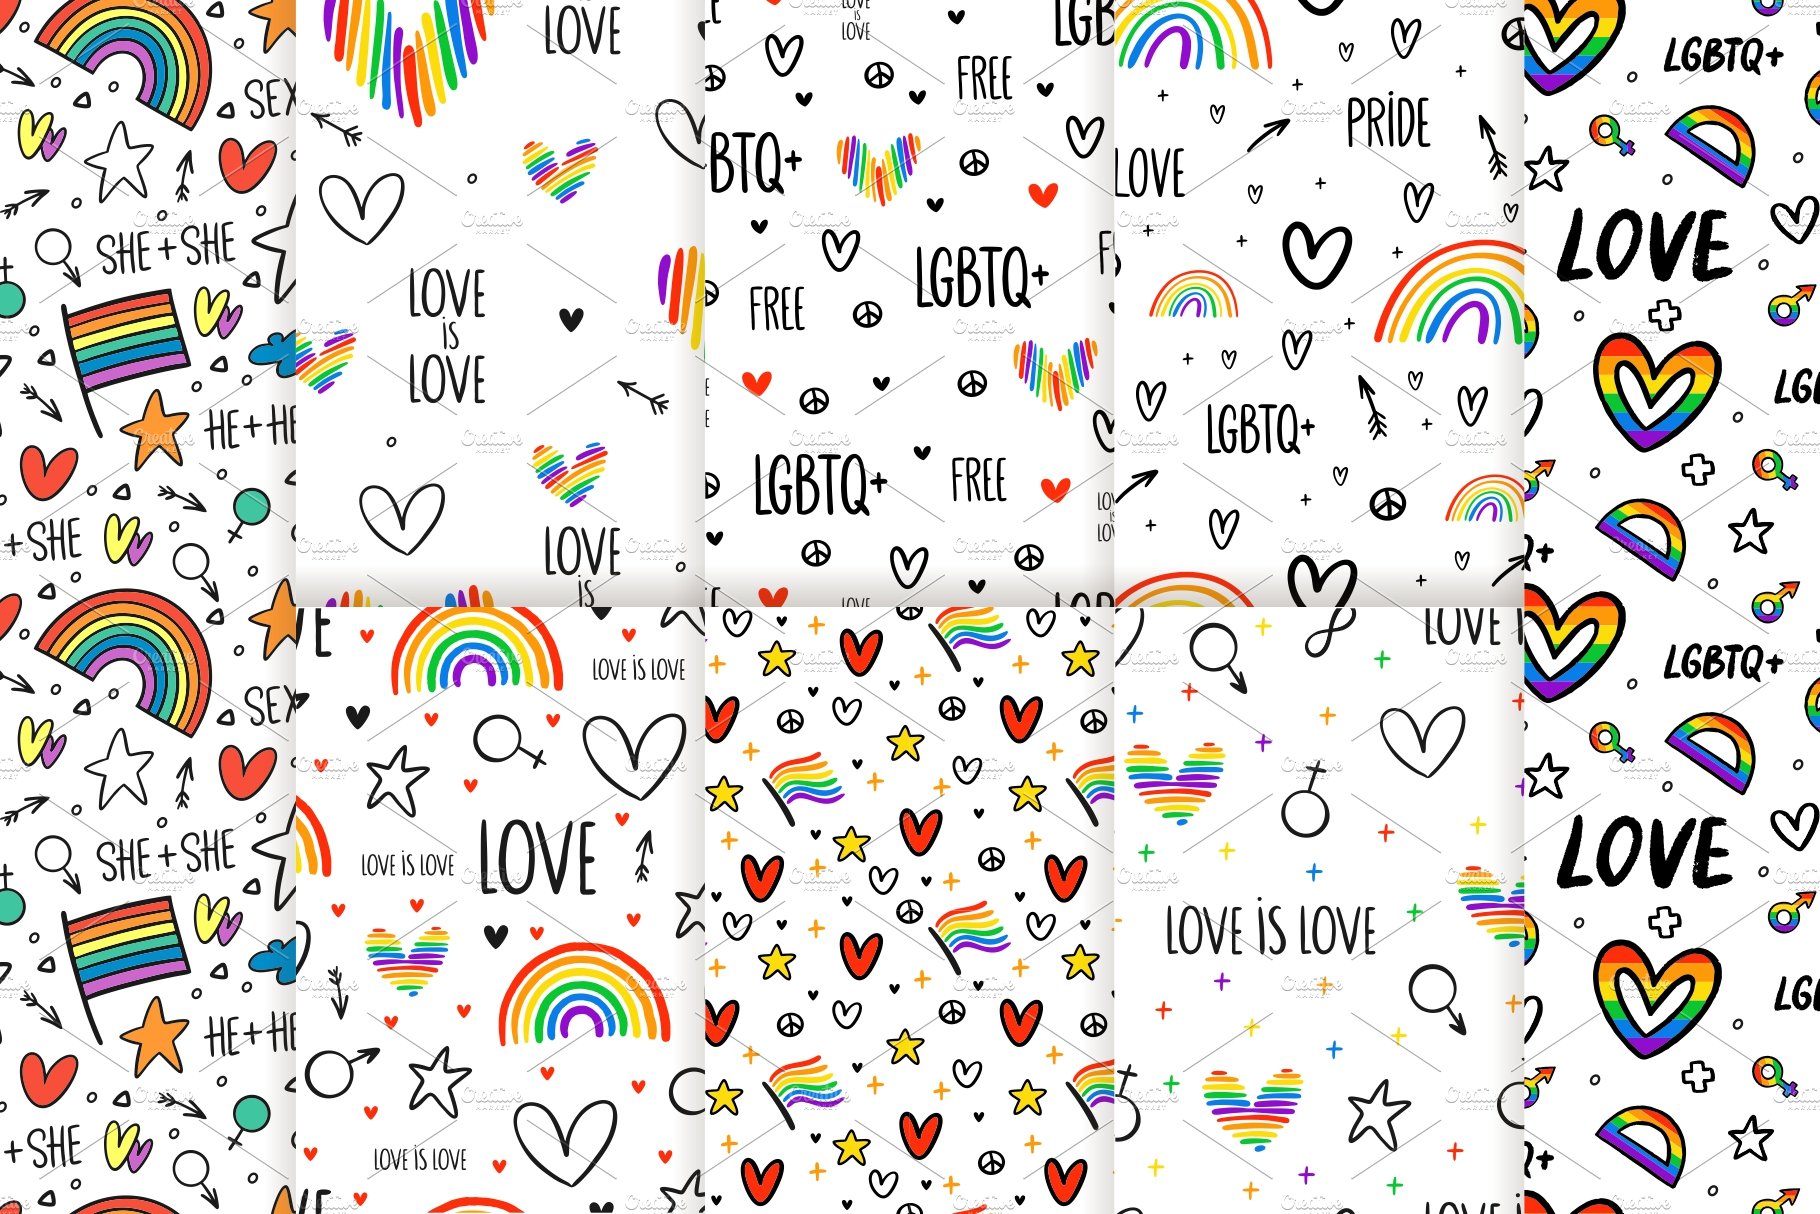 8 LGBTQ+ Never Ending Patterns preview image.